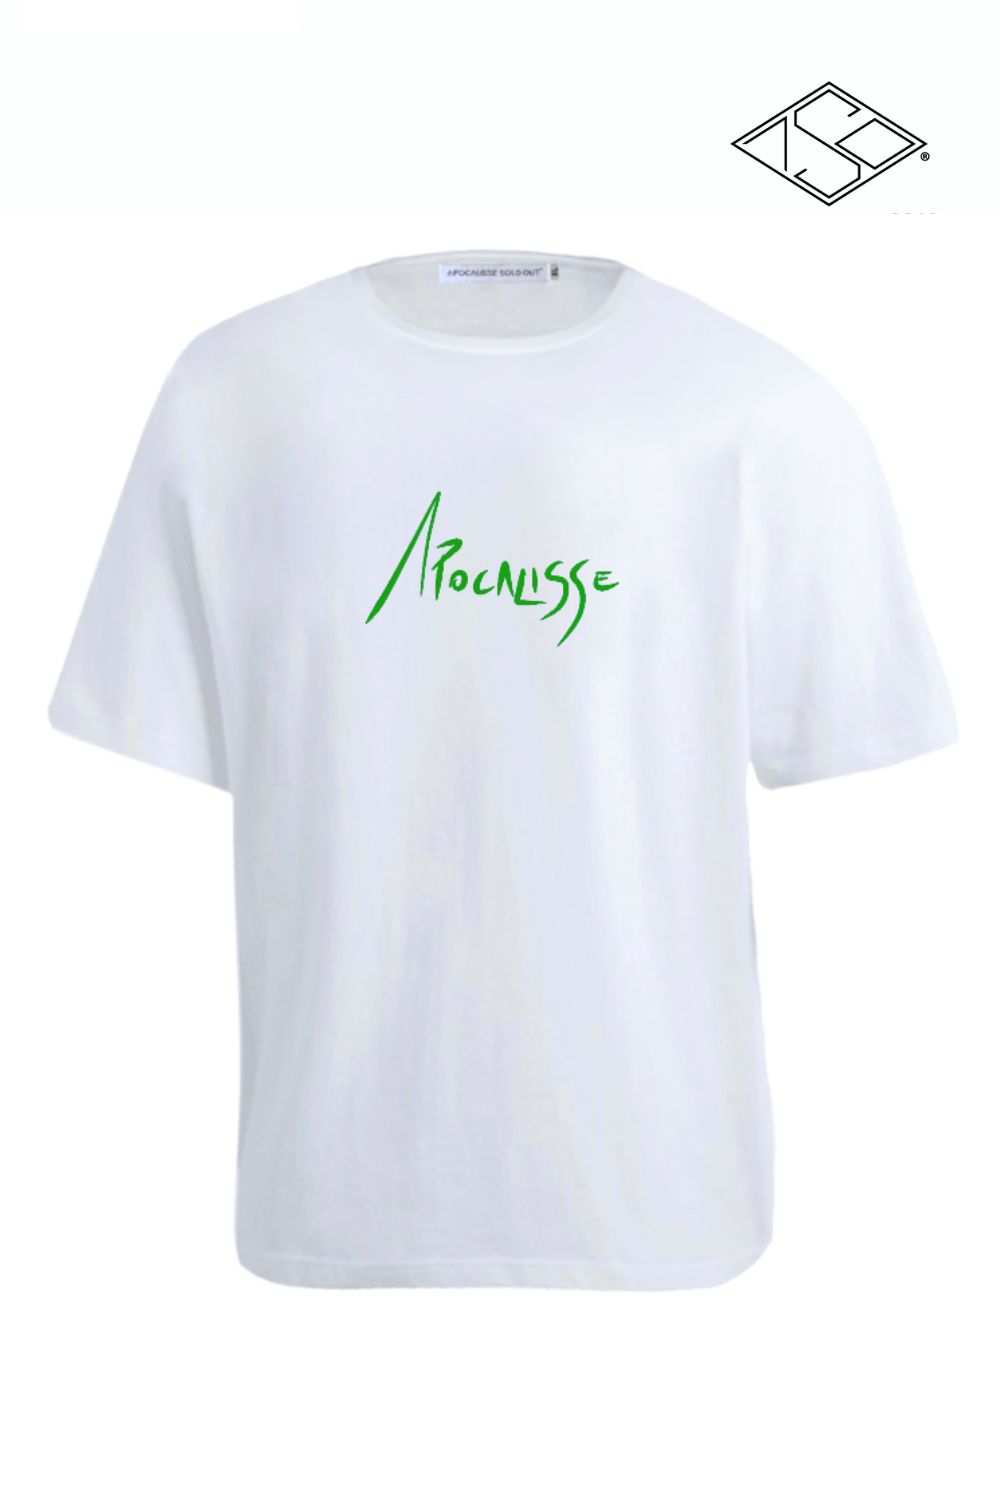 Apocalisse Basic edition green print white tshirt by ApocalisseSoldOut® Fashion Brand